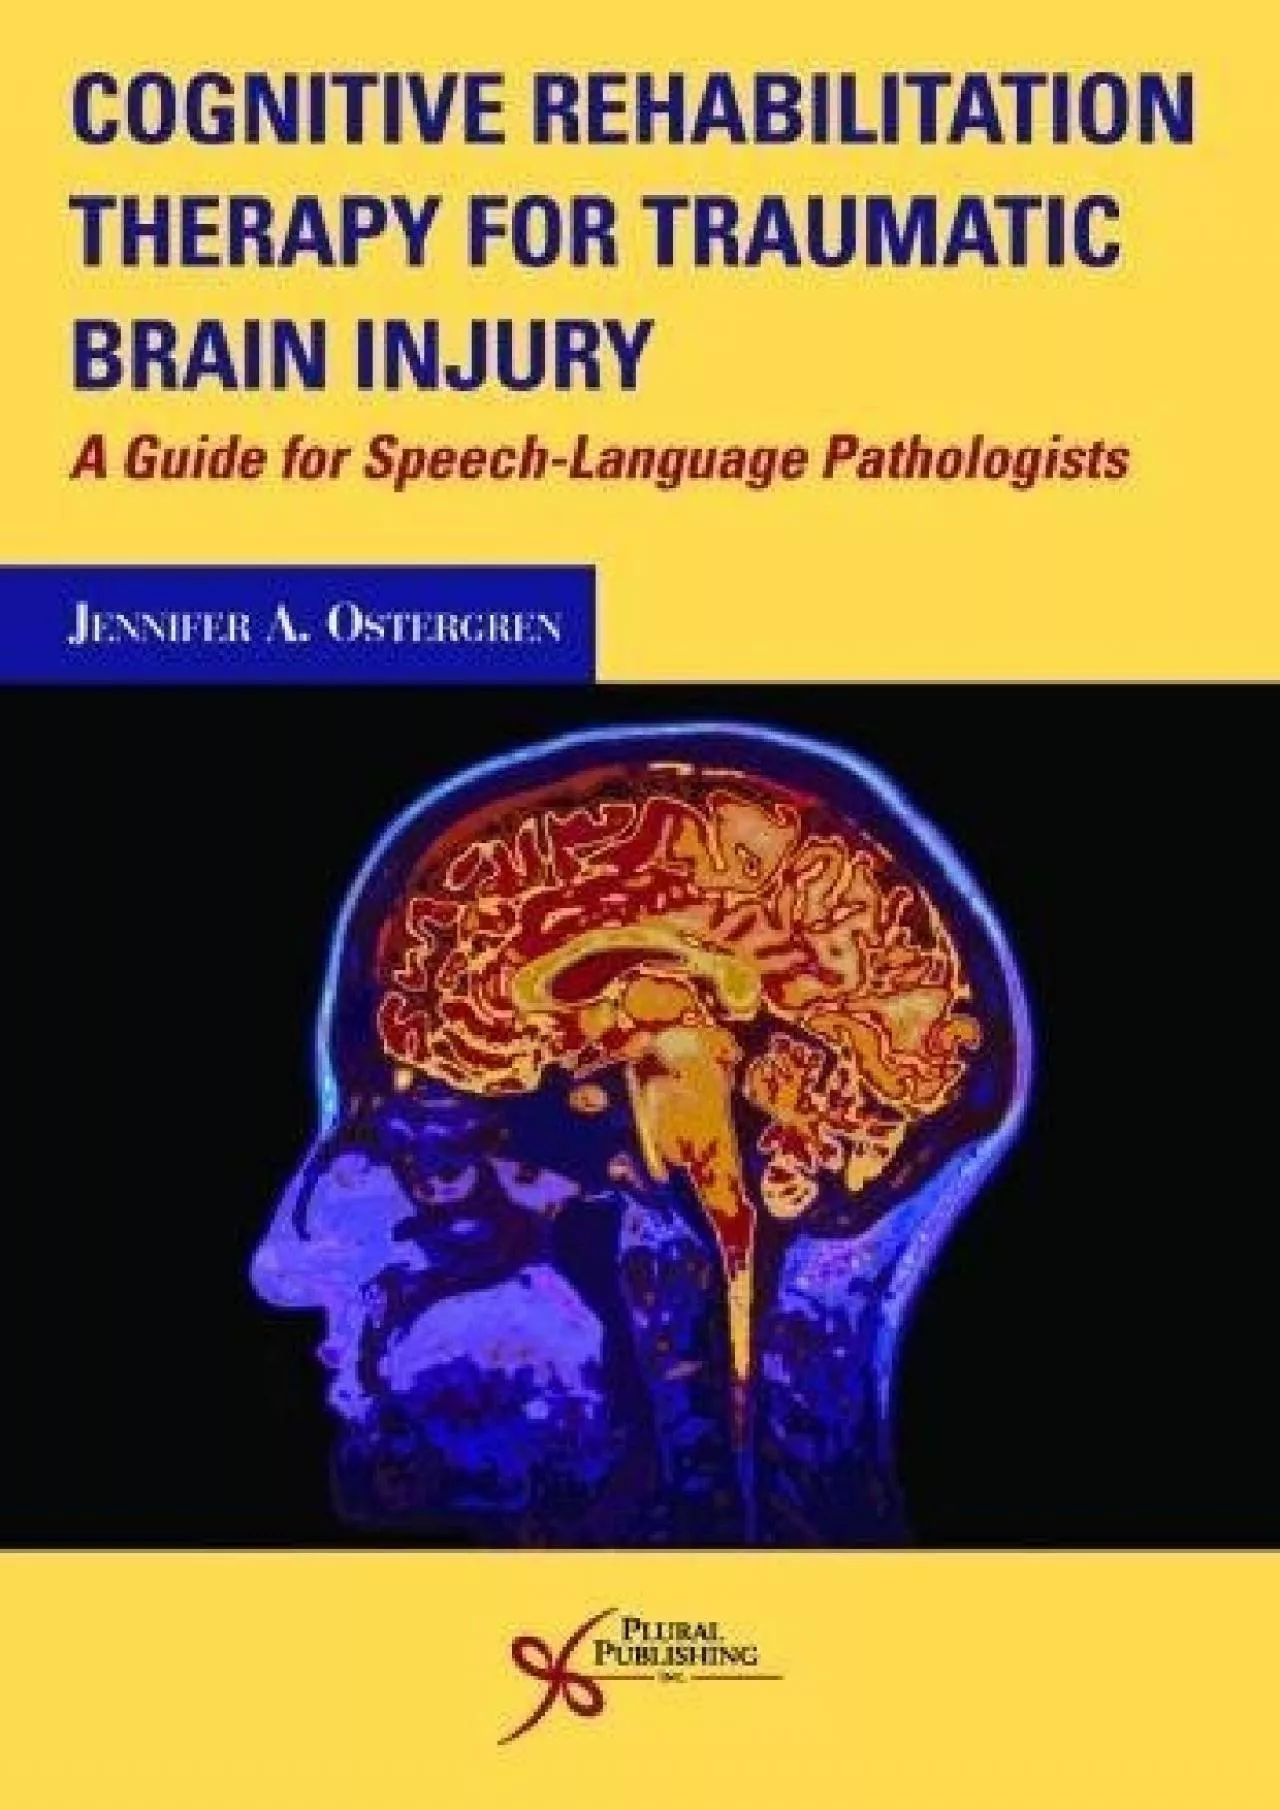 (DOWNLOAD)-Cognitive Rehabilitation Therapy for Traumatic Brain Injury: A Guide for Speech-Language